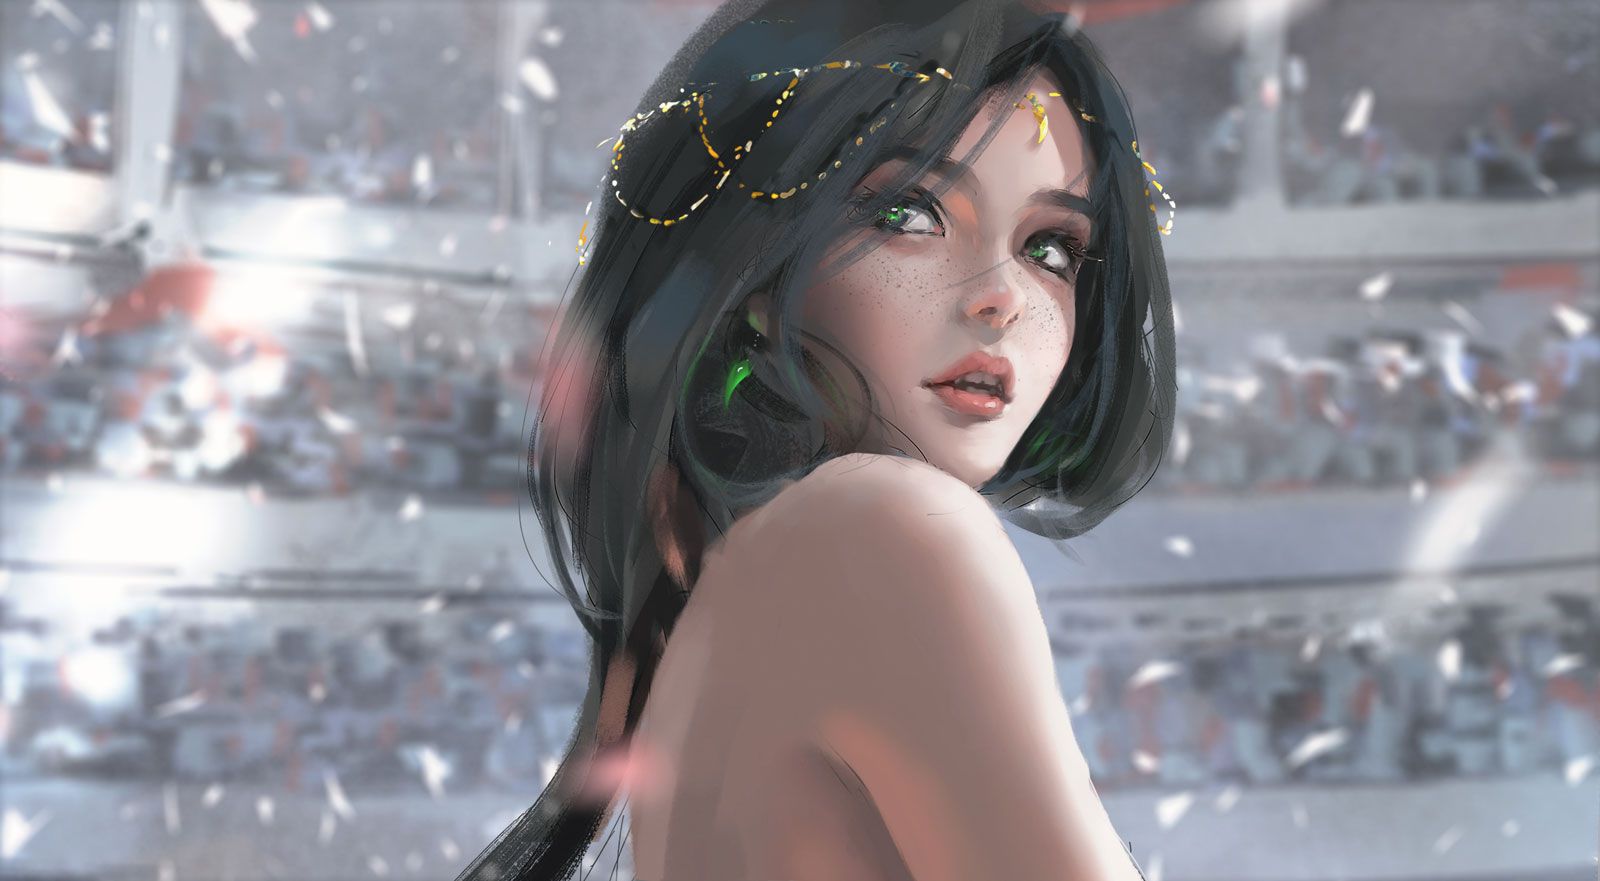 【Black hair】An image of a beautiful girl with black hair that you have Part 5 19